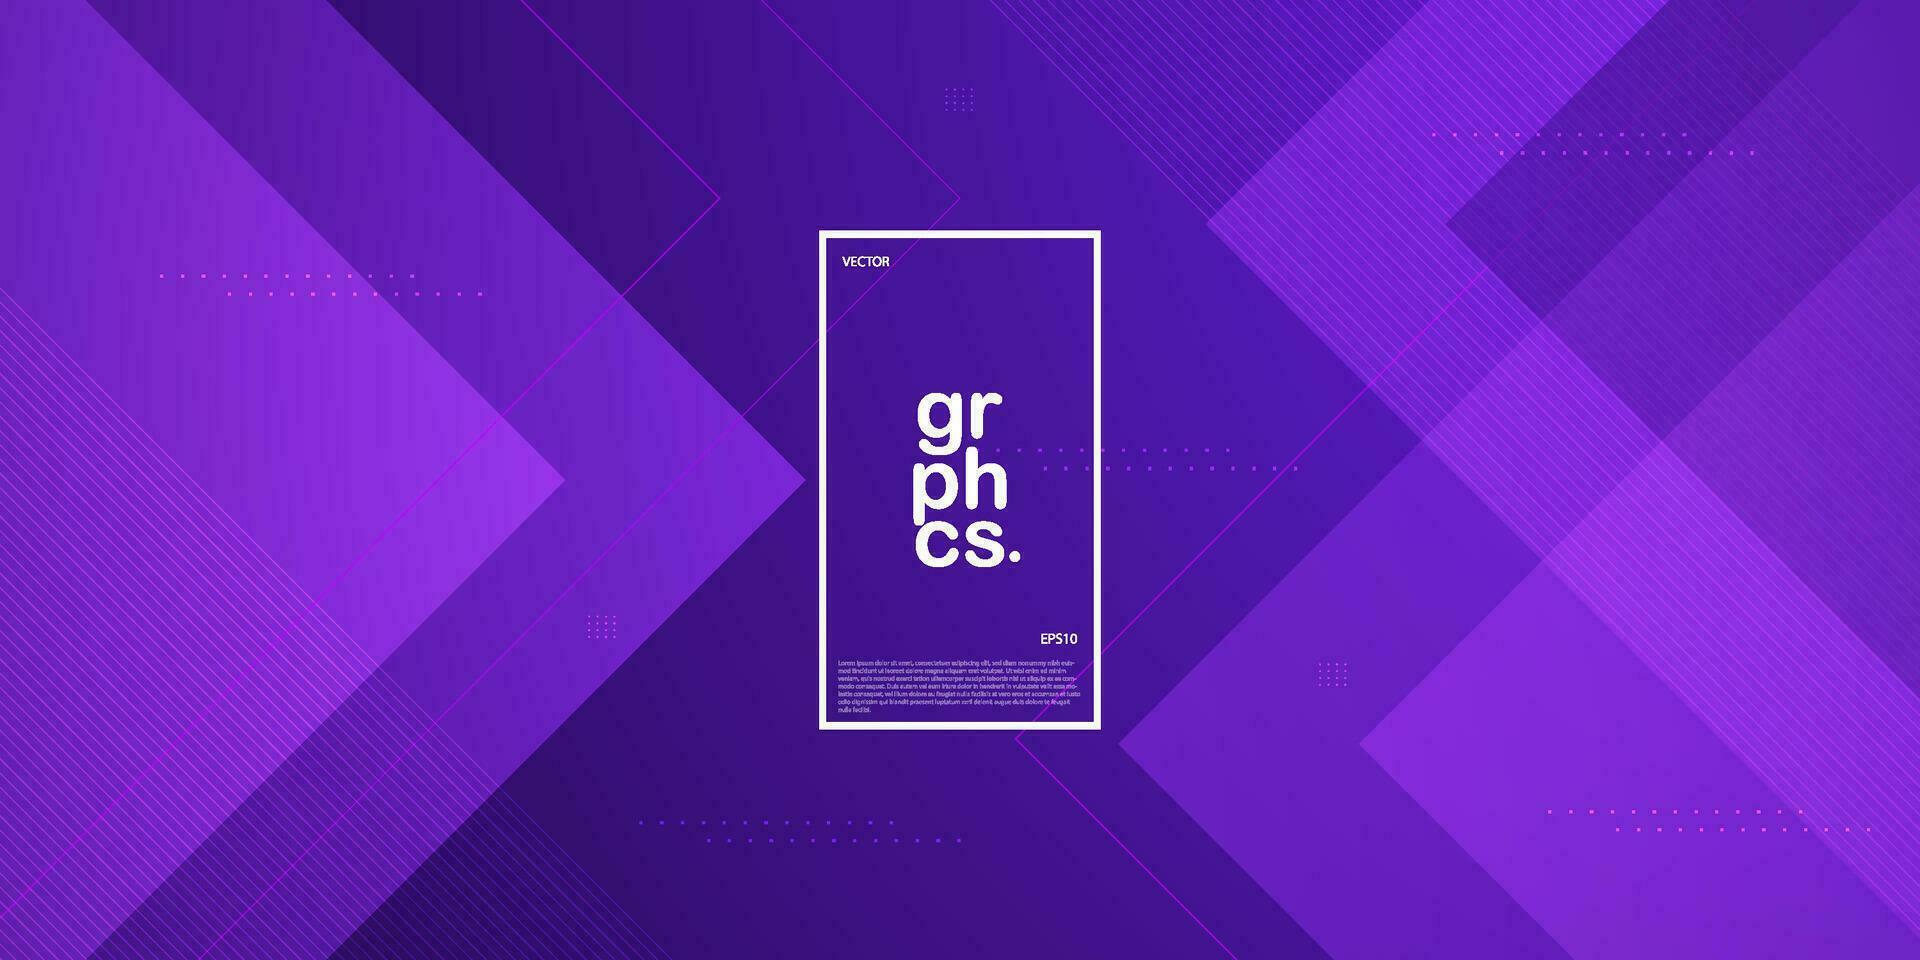 Abstract dark purple background with overlap simple square lines. Looks 3d with trendy pattern. Suitable for posters, brochures, e-sports and others. Eps10 vector